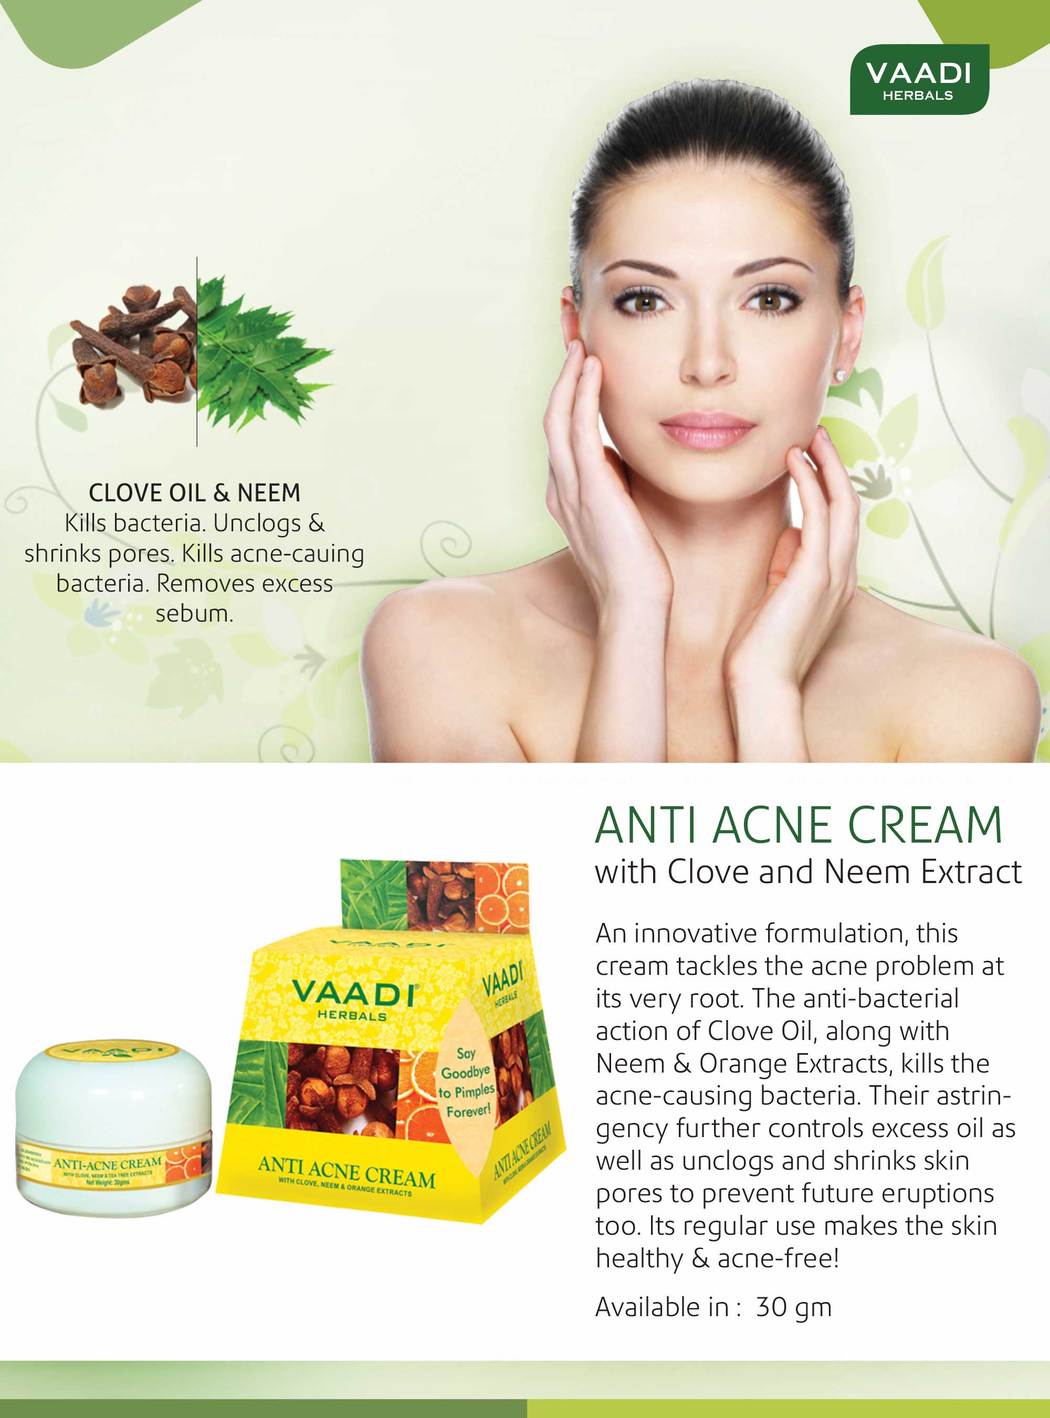 Organic Anti Acne Cream with Clove Oil & Neem Extract - Anti Bacterial Therapy - Prevents Acne (30 gms / 1.1 oz)